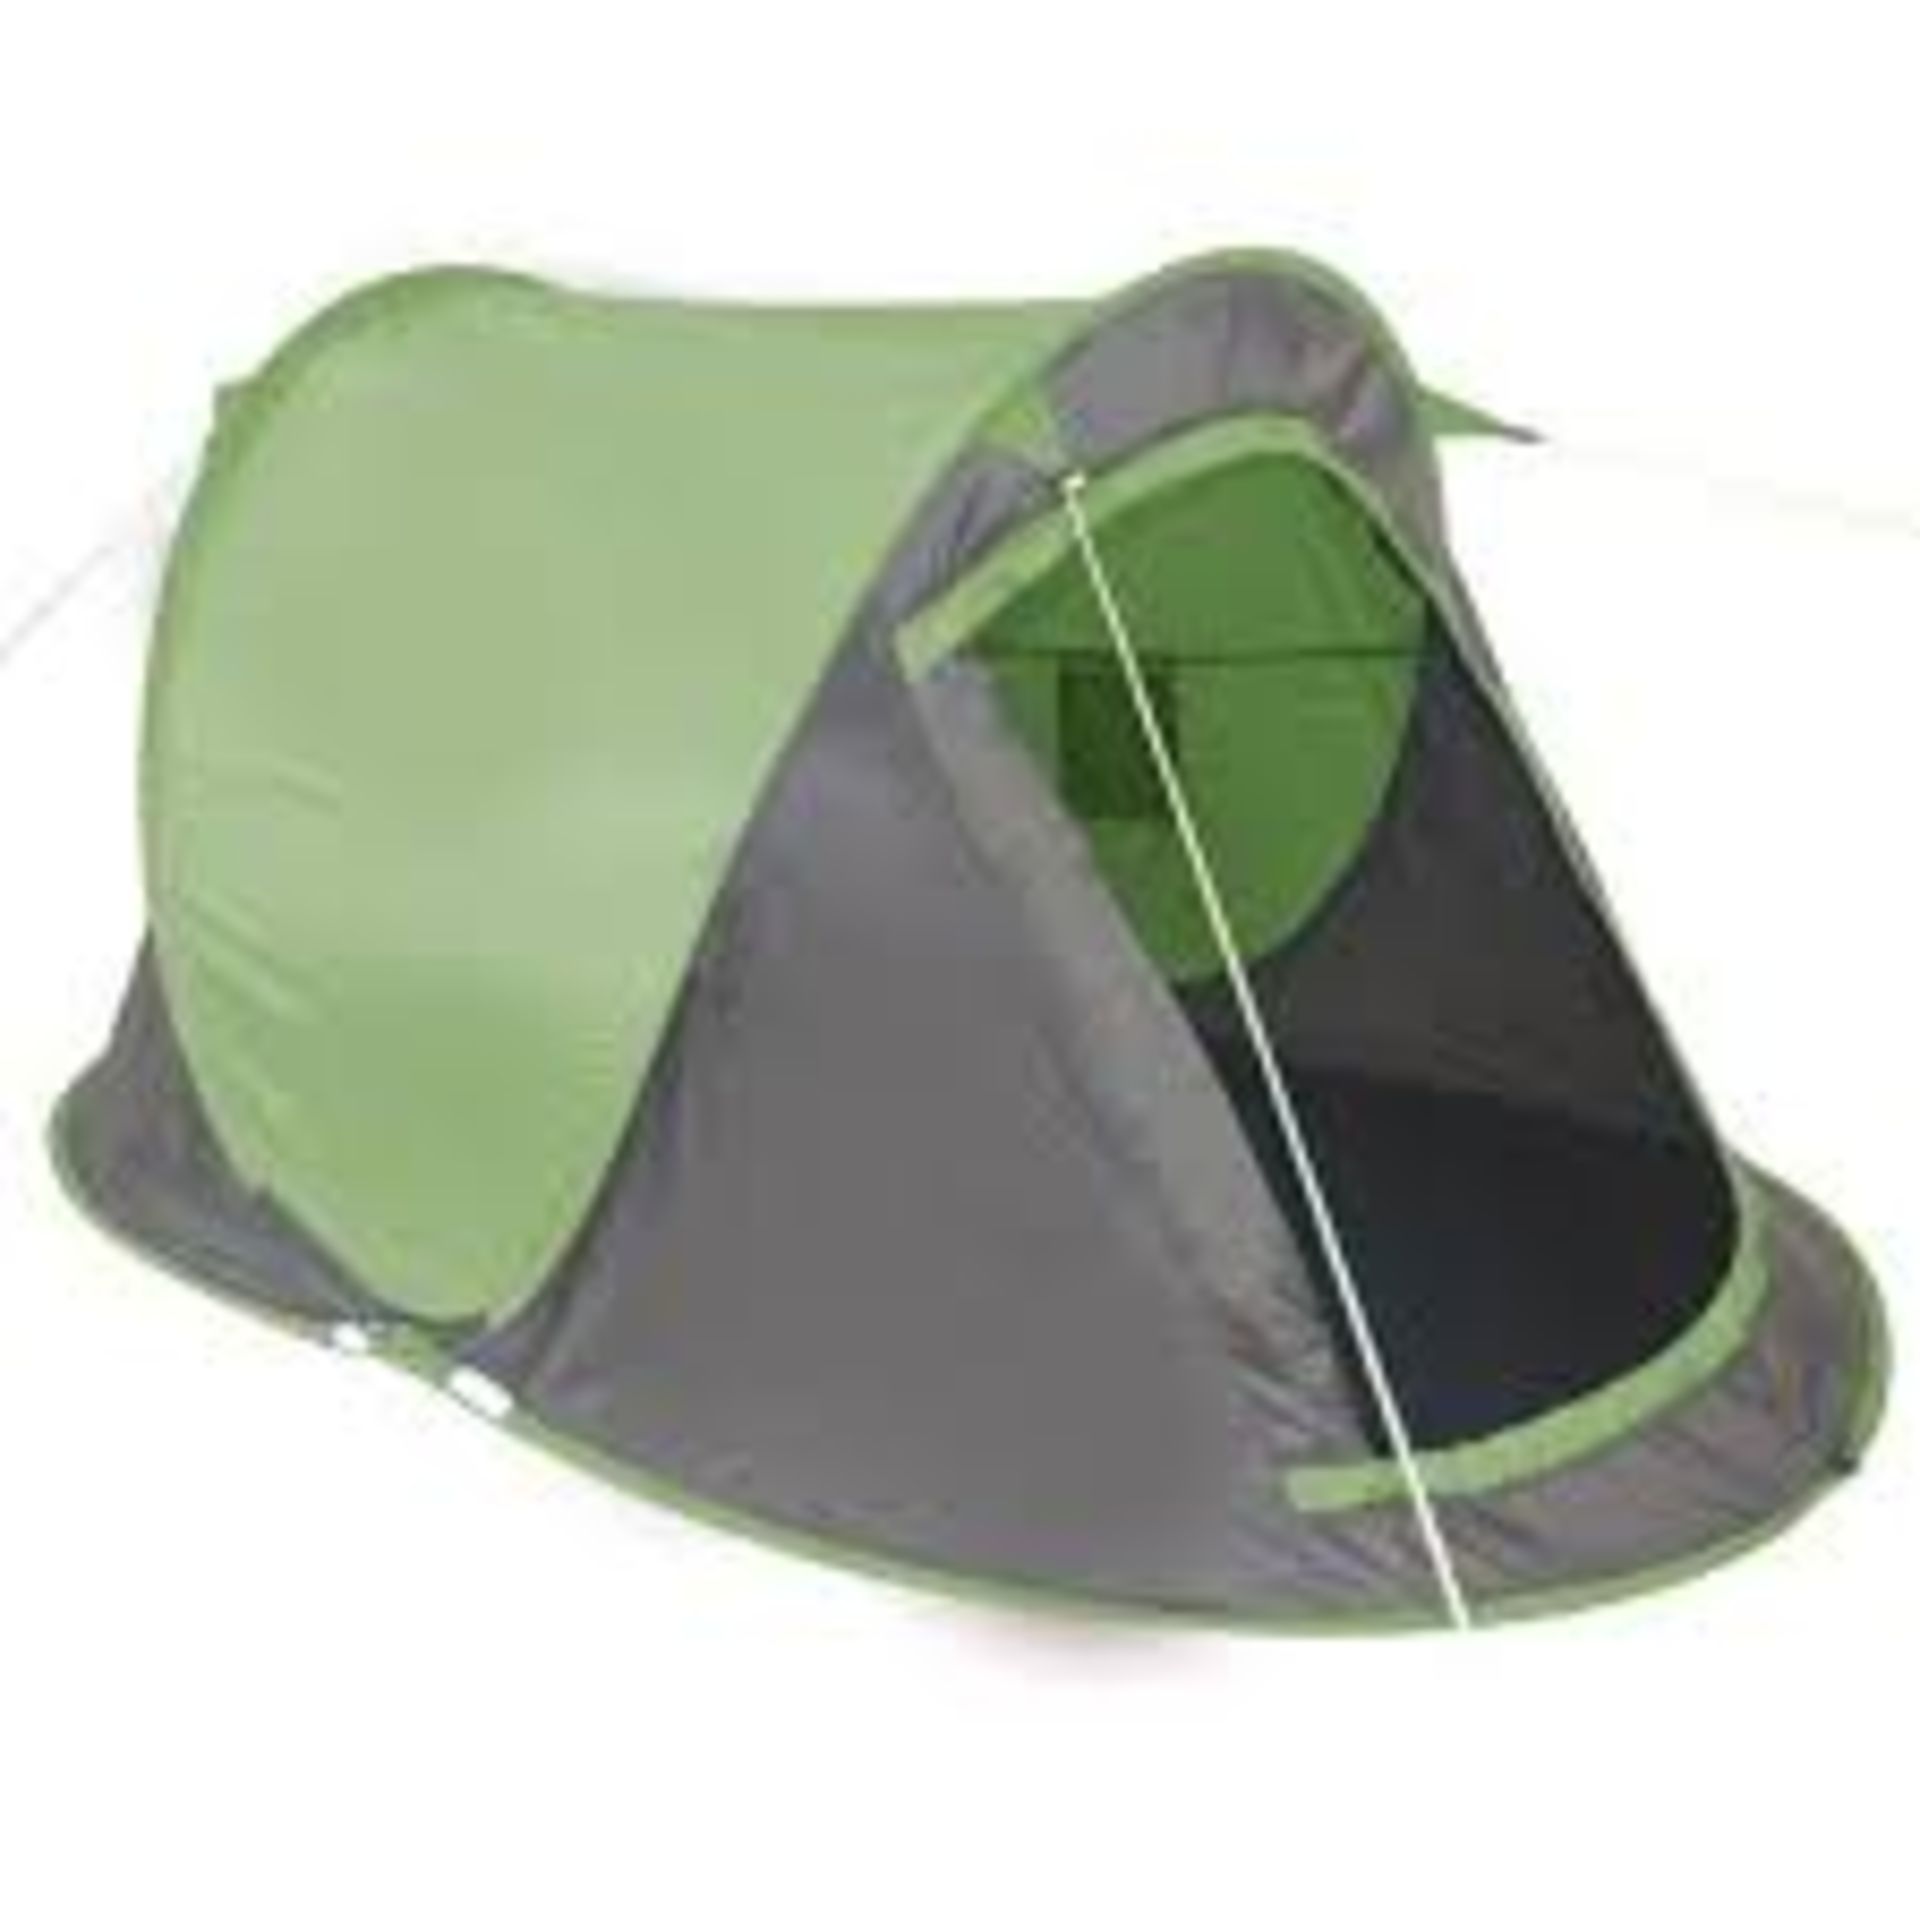 V  Grade A Pop up 2 man tent with Hi-viz guy ropes X 16  Bid price to be multiplied by Sixteen